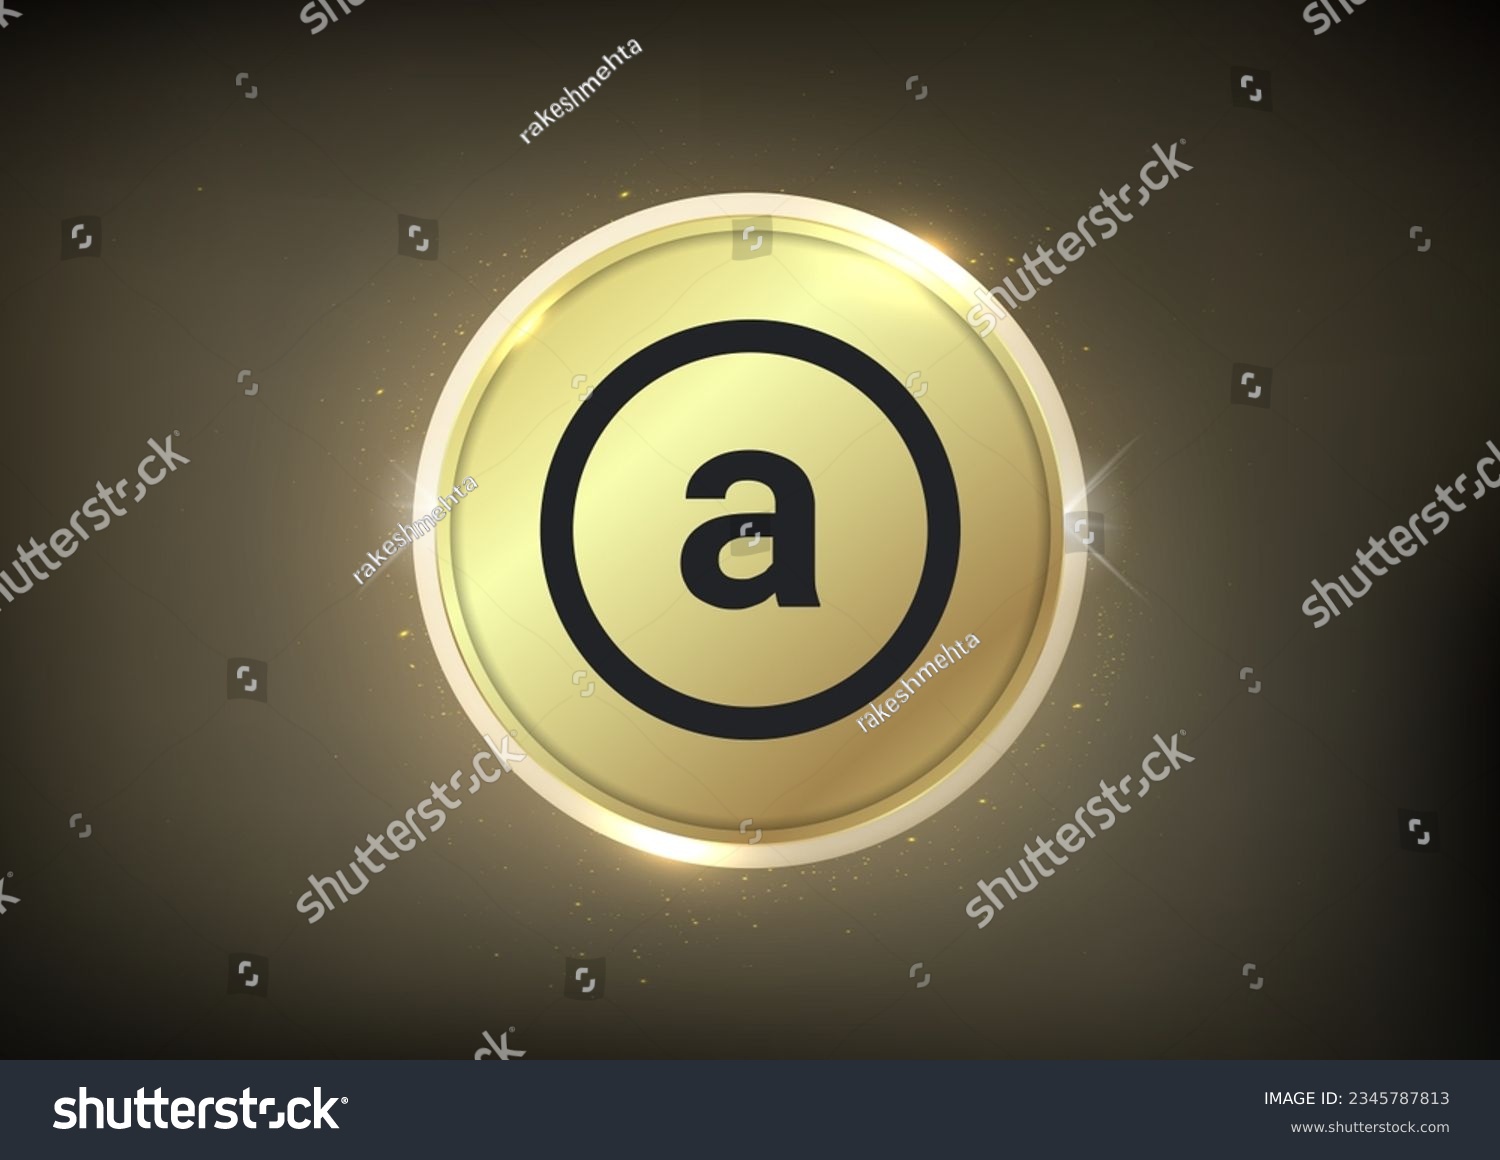 SVG of Arweave (AR) Crypto logo banner . Arweave cryptocurrency golden coin symbol  isolated on golden background svg